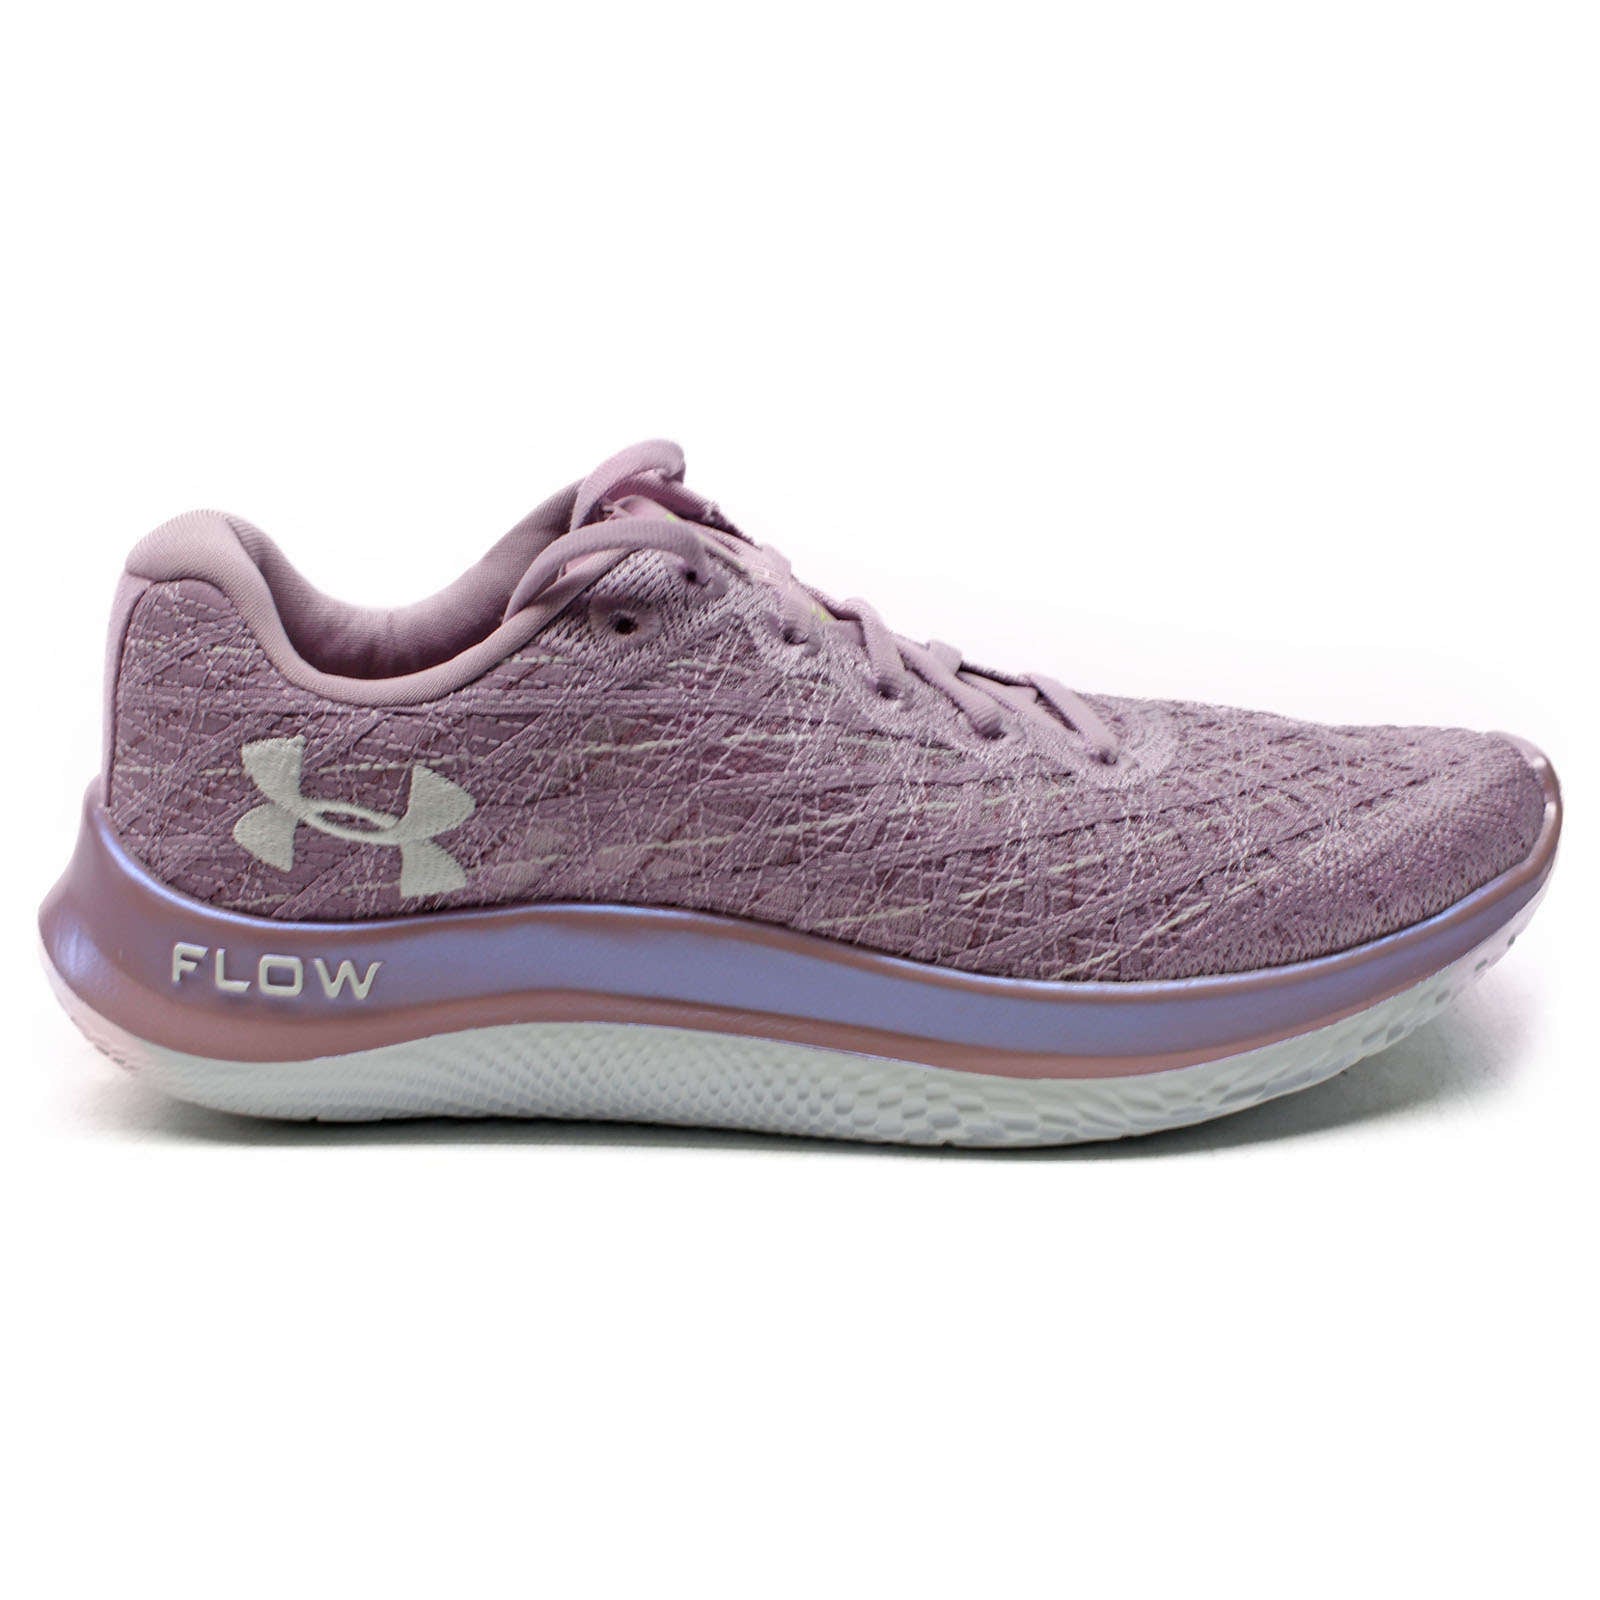 Under Armour Flow Velociti Wind Synthetic Textile Women's Low-Top Trainers#color_pink pink